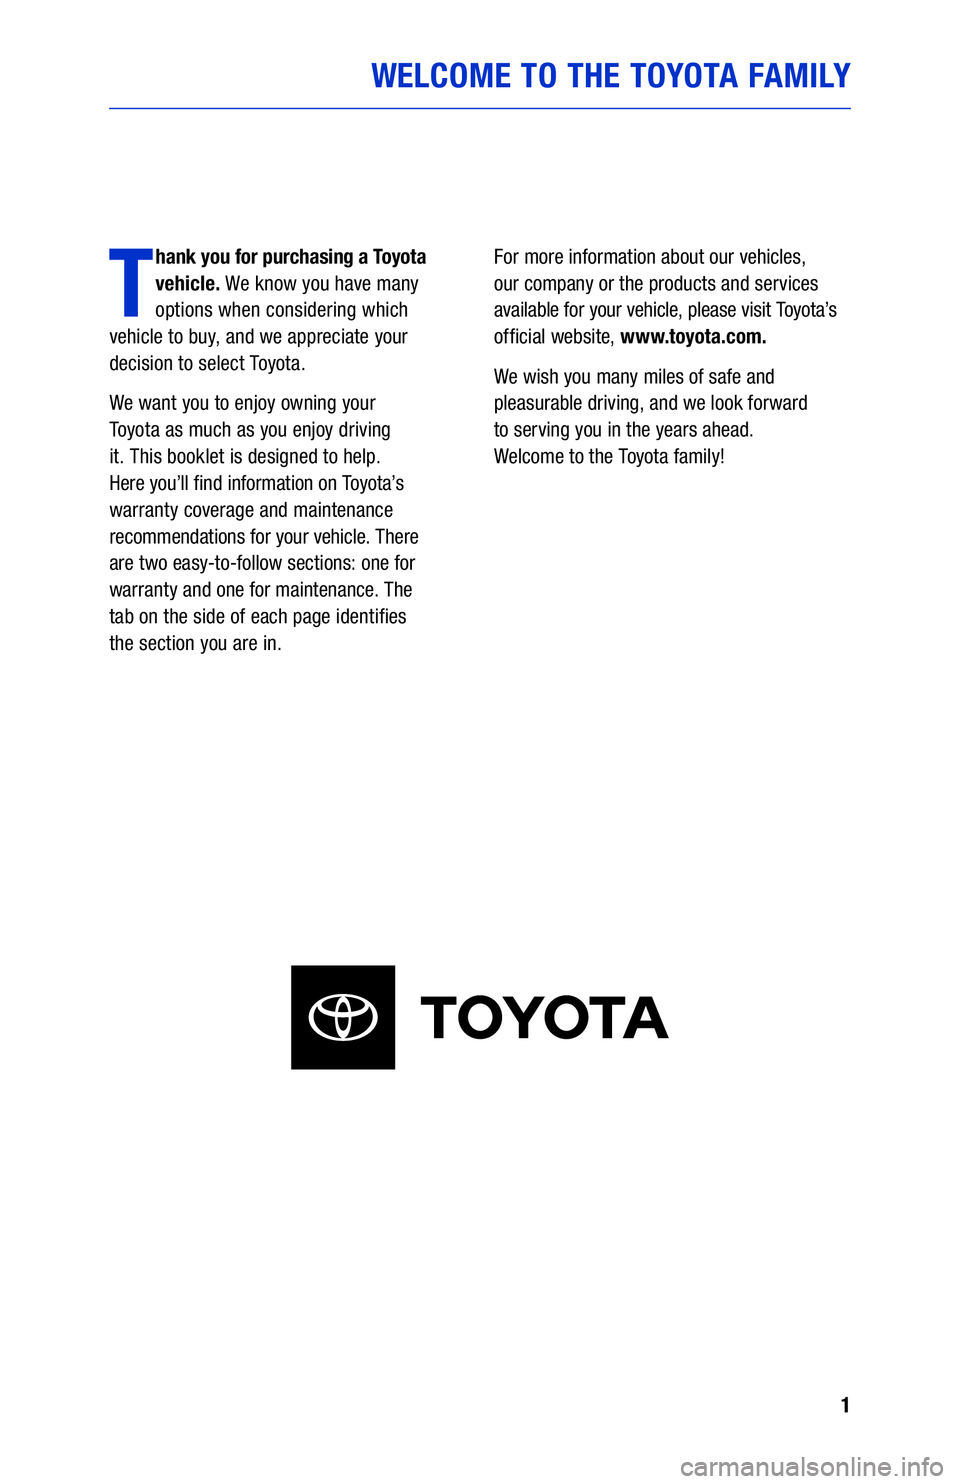 TOYOTA PRIUS PRIME 2021  Warranties & Maintenance Guides (in English) 1
WELCOME TO THE TOYOTA FAMILY
T
hank you for purchasing a Toyota 
vehicle. We know you have many 
options when considering which   
vehicle to buy, and we appreciate your 
decision to select Toyota.
